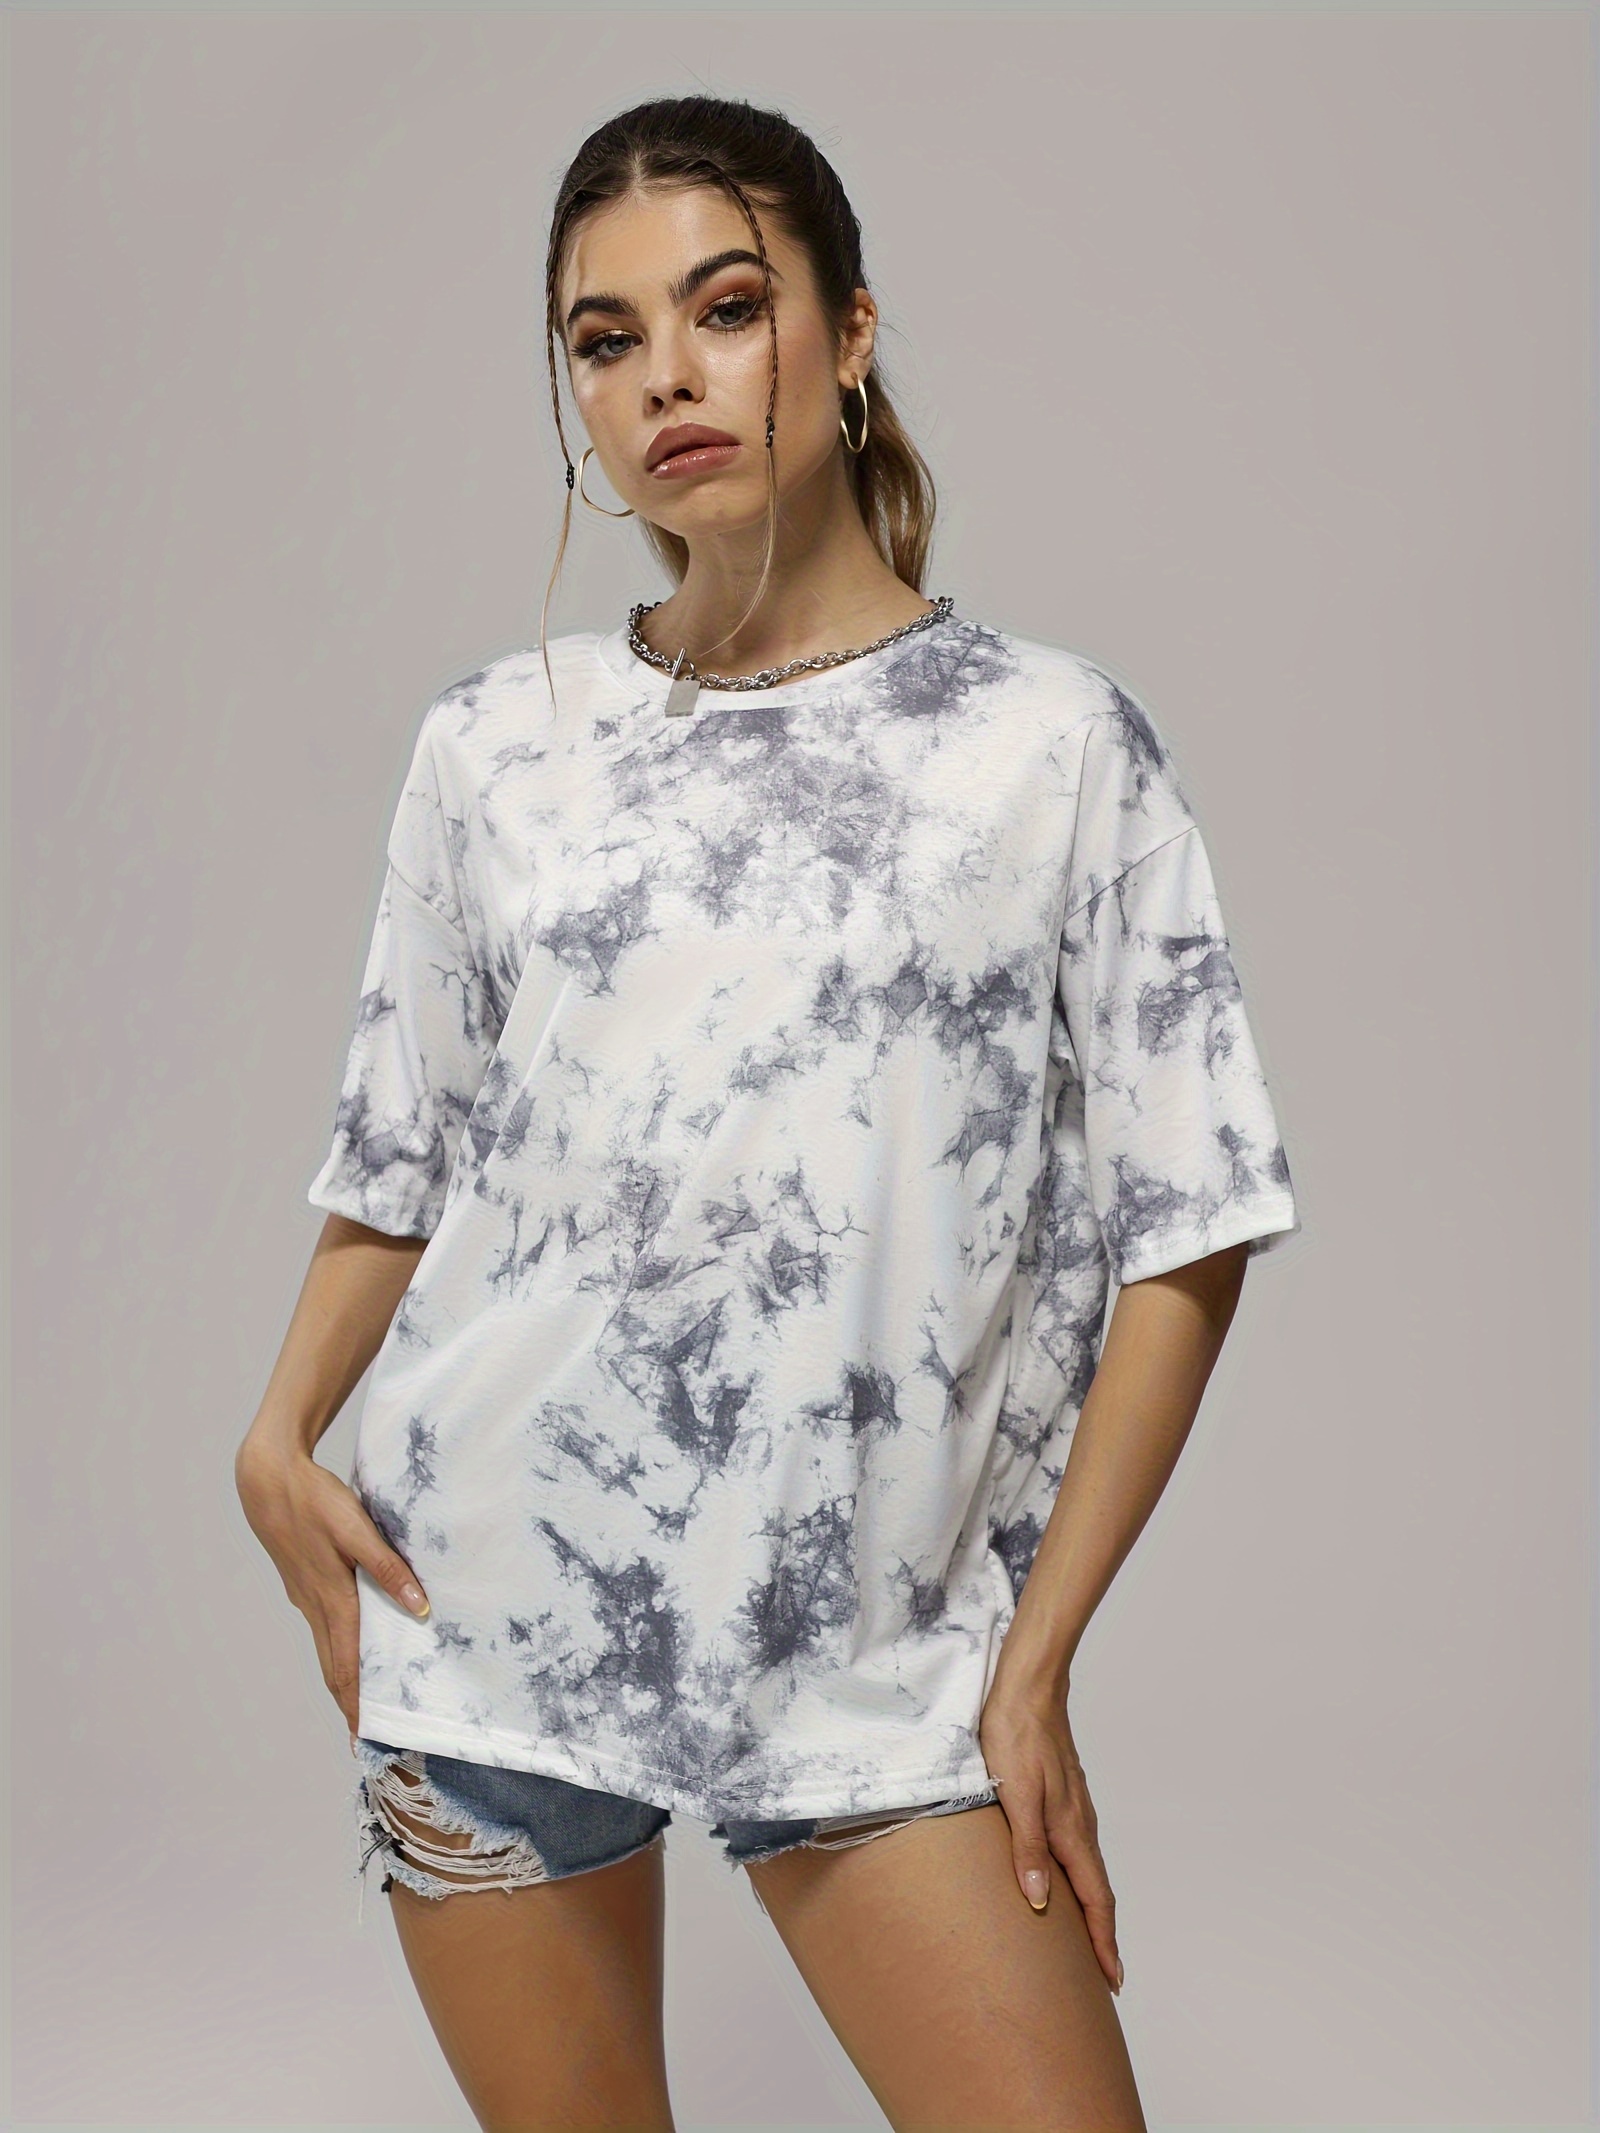 Cute Printed Loose Fit Running Exercise T-Shirt Tie-Dye Women